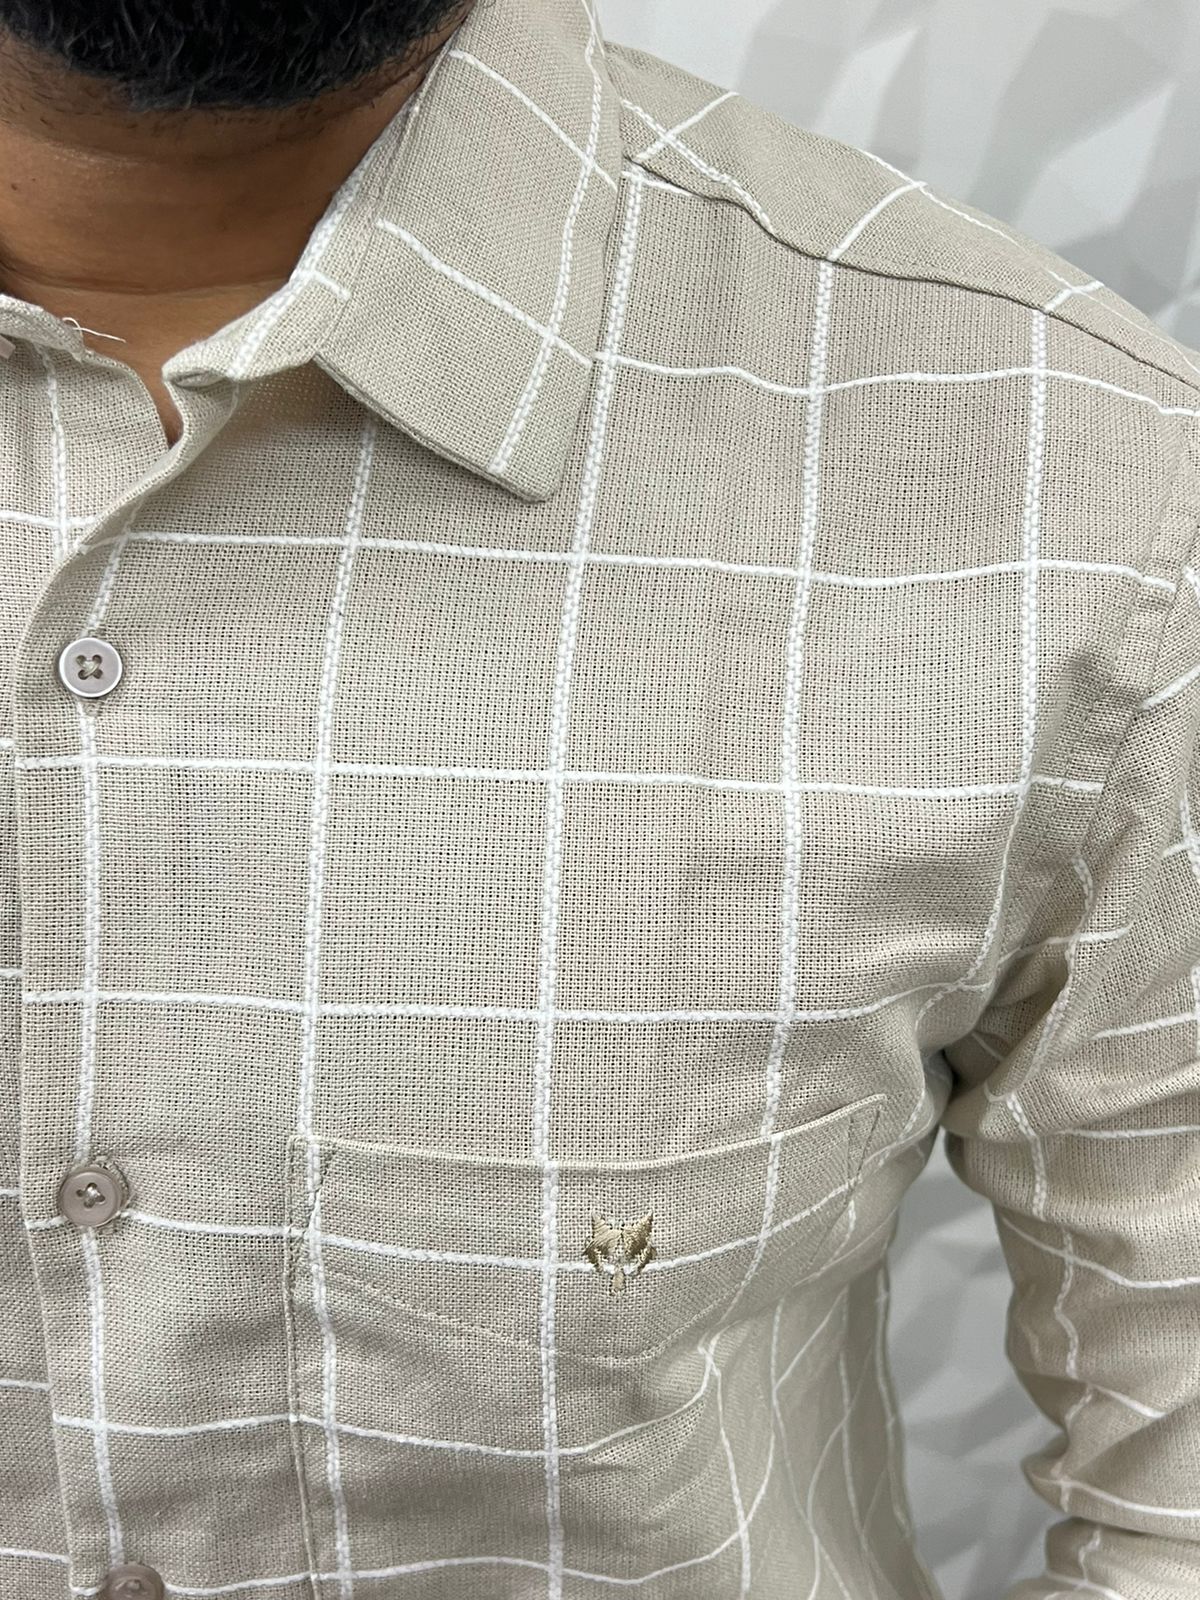 Jute fabric embroidery chex shirt